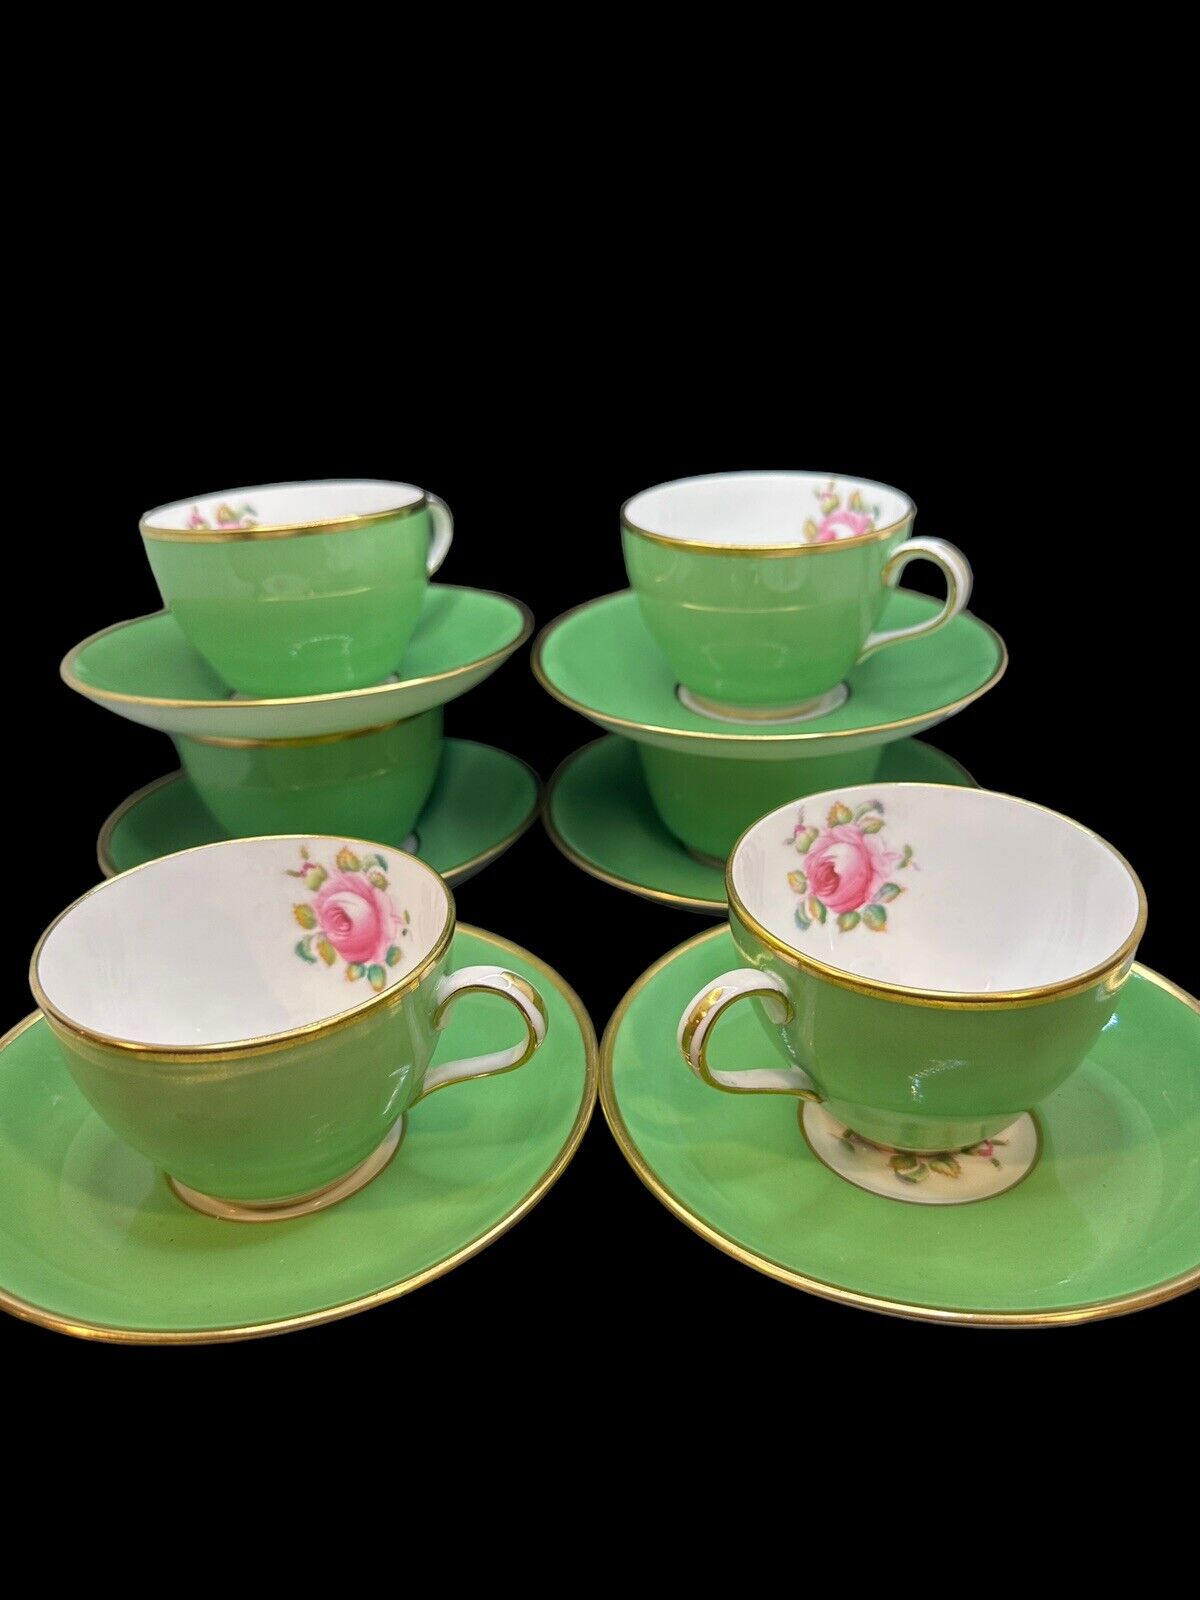 6 New Chelsea Staffs Coffee/Tea Cups And Saucers Green floral. SHABBY 